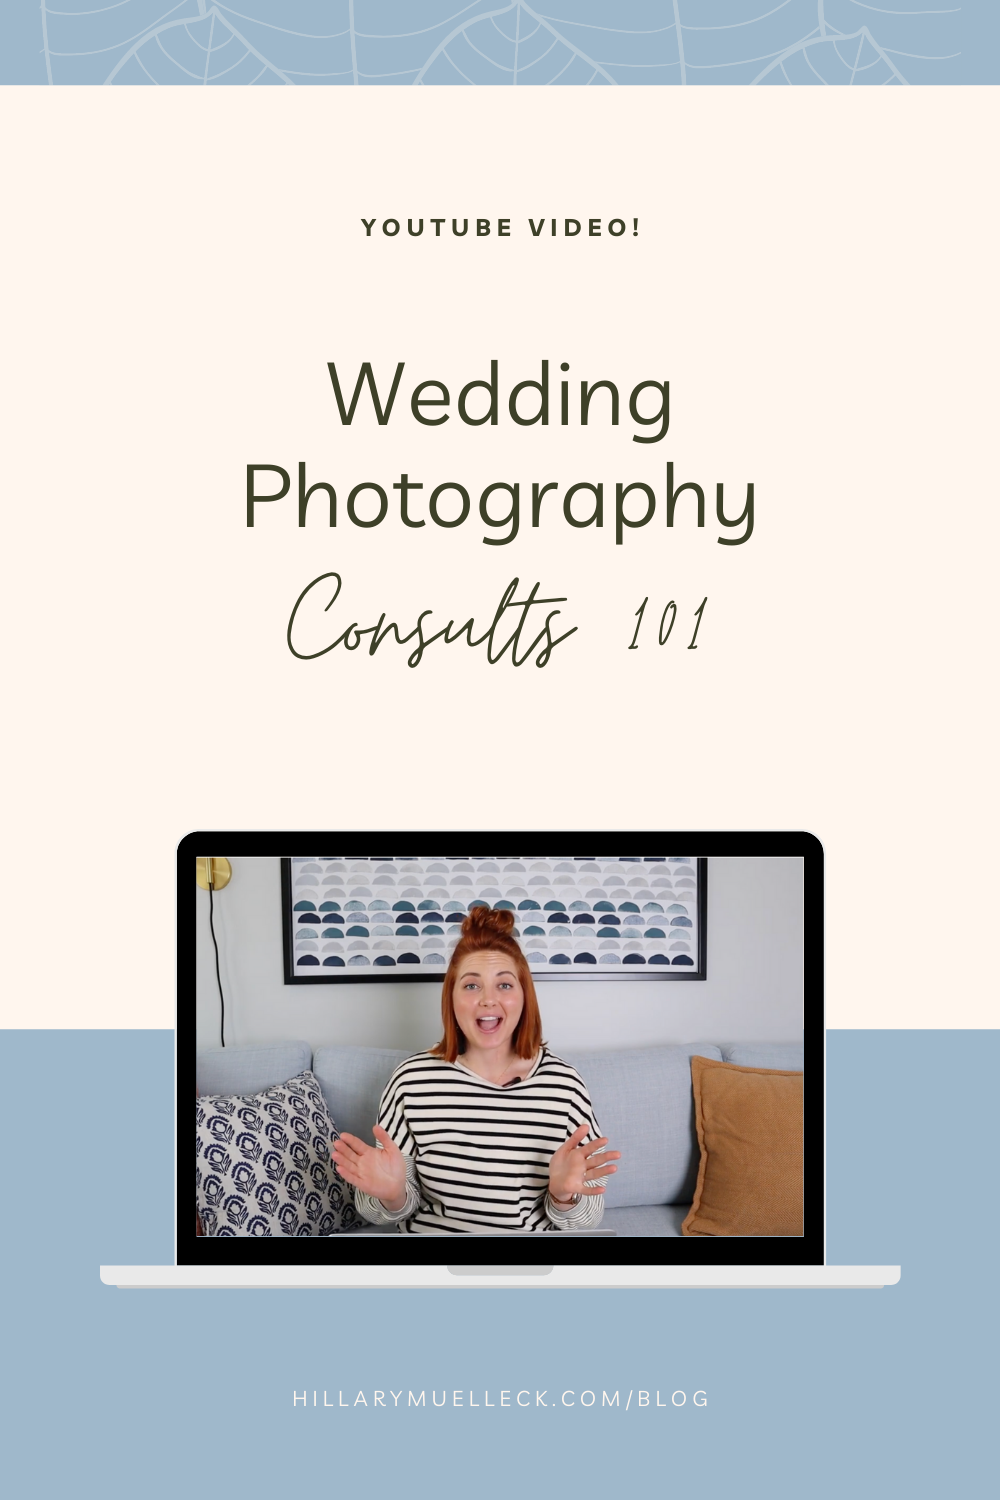 Wedding Photography Consults 101: tips for booking more couples as a wedding photographer, shared by Hillary Muelleck